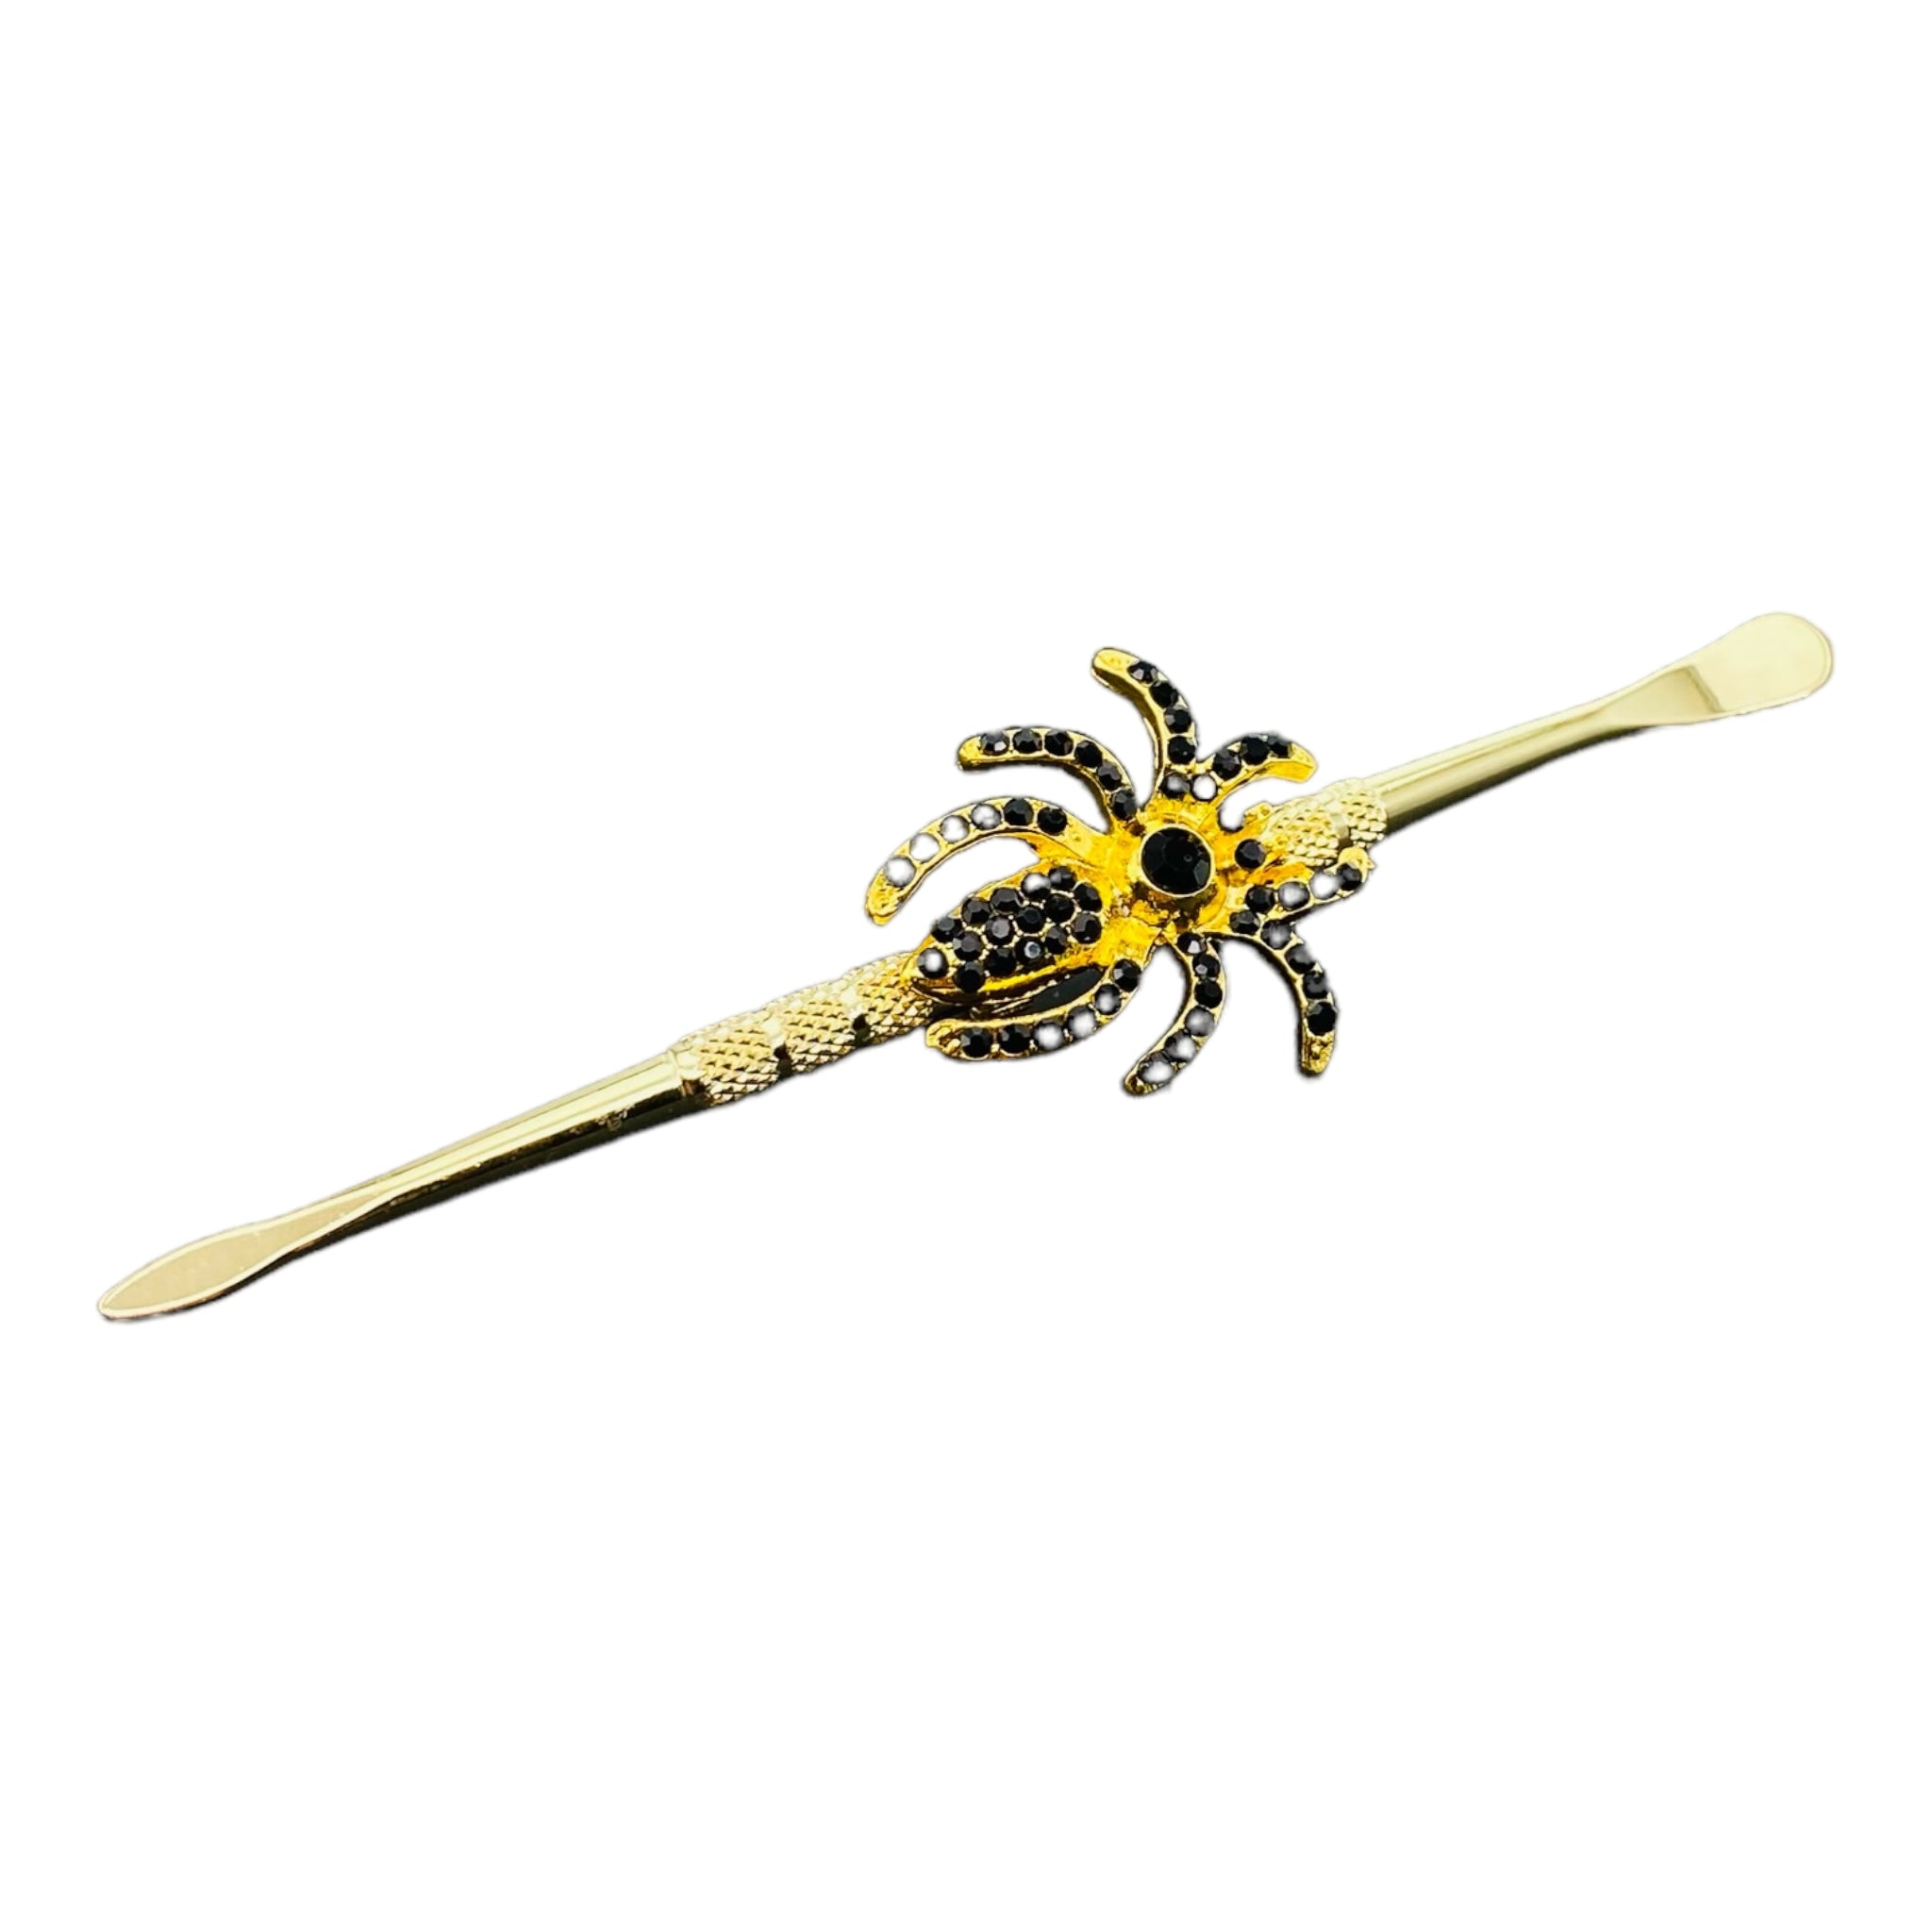 Bedazzled Spider Gold Paddle Scoop And Spear Point Dab Tool